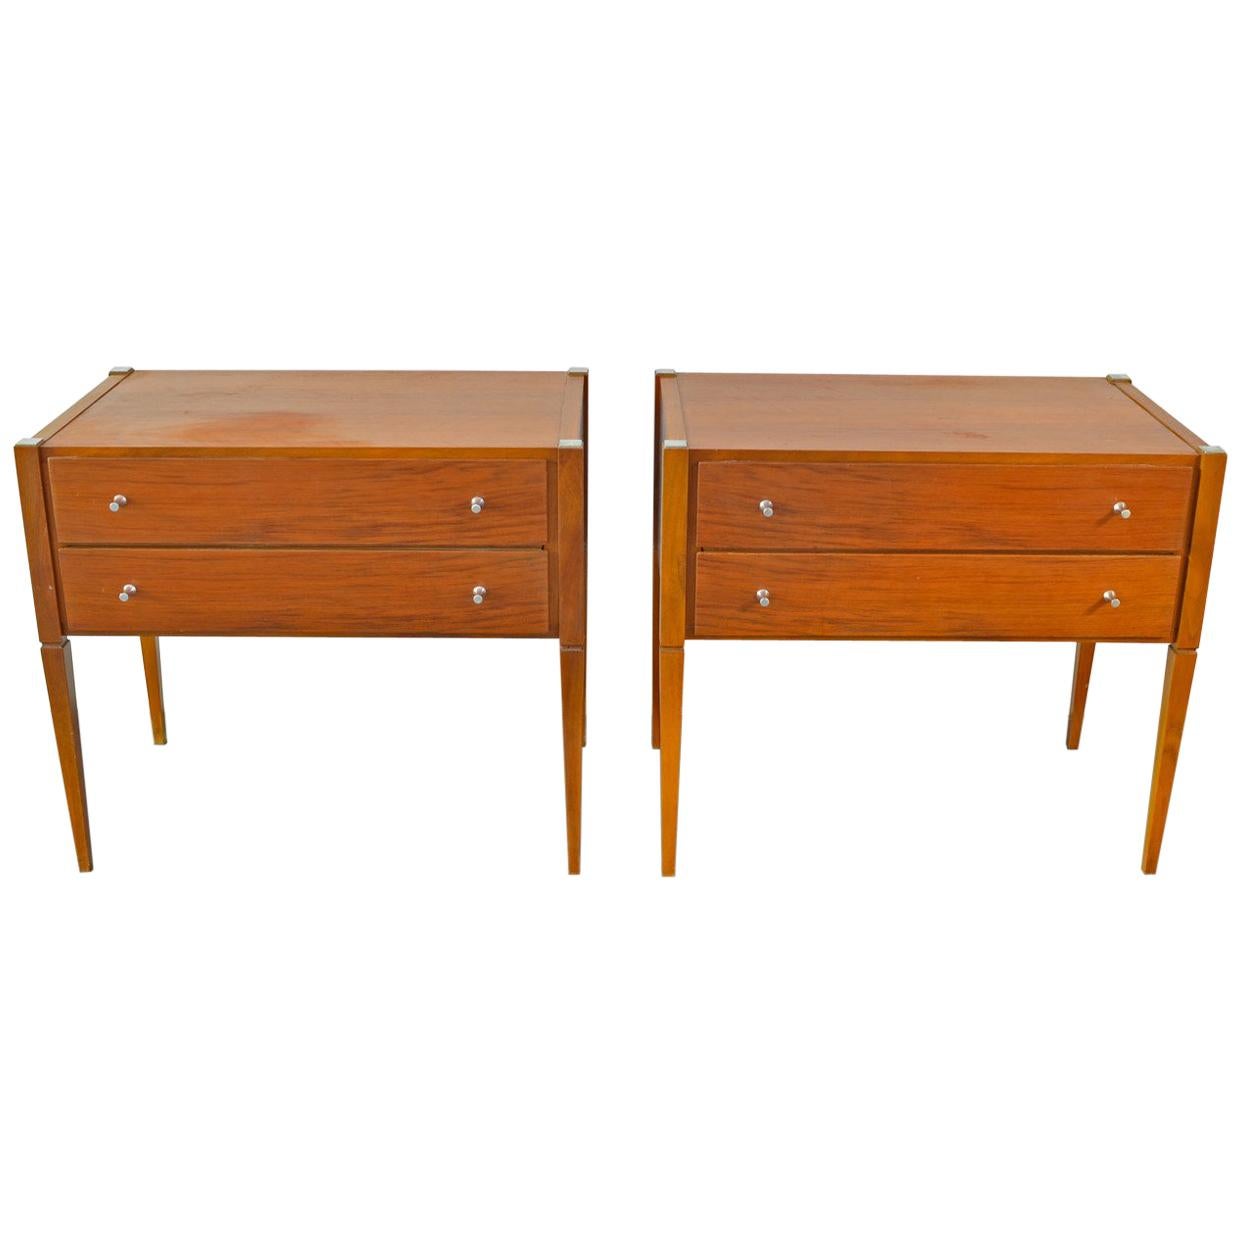 Pair of Bedside Tables Nightstands Made of Red, Brown Cherrywood, 1960s France